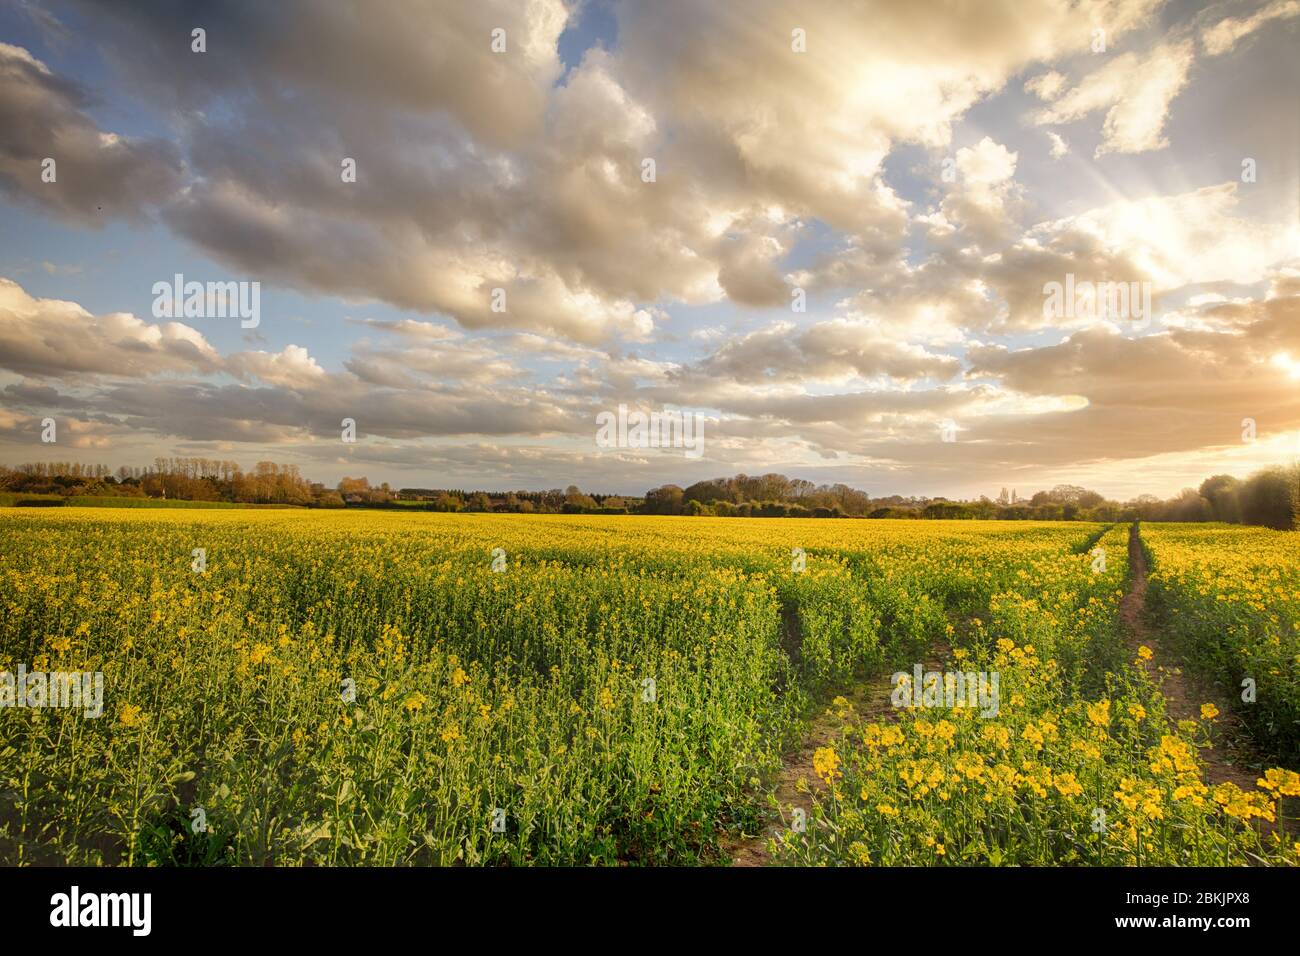 Sunset landscape over rapeseed crops in rural Norfolk. Beautiful clouds and natural light over tracks through a crop field. Stock Photo